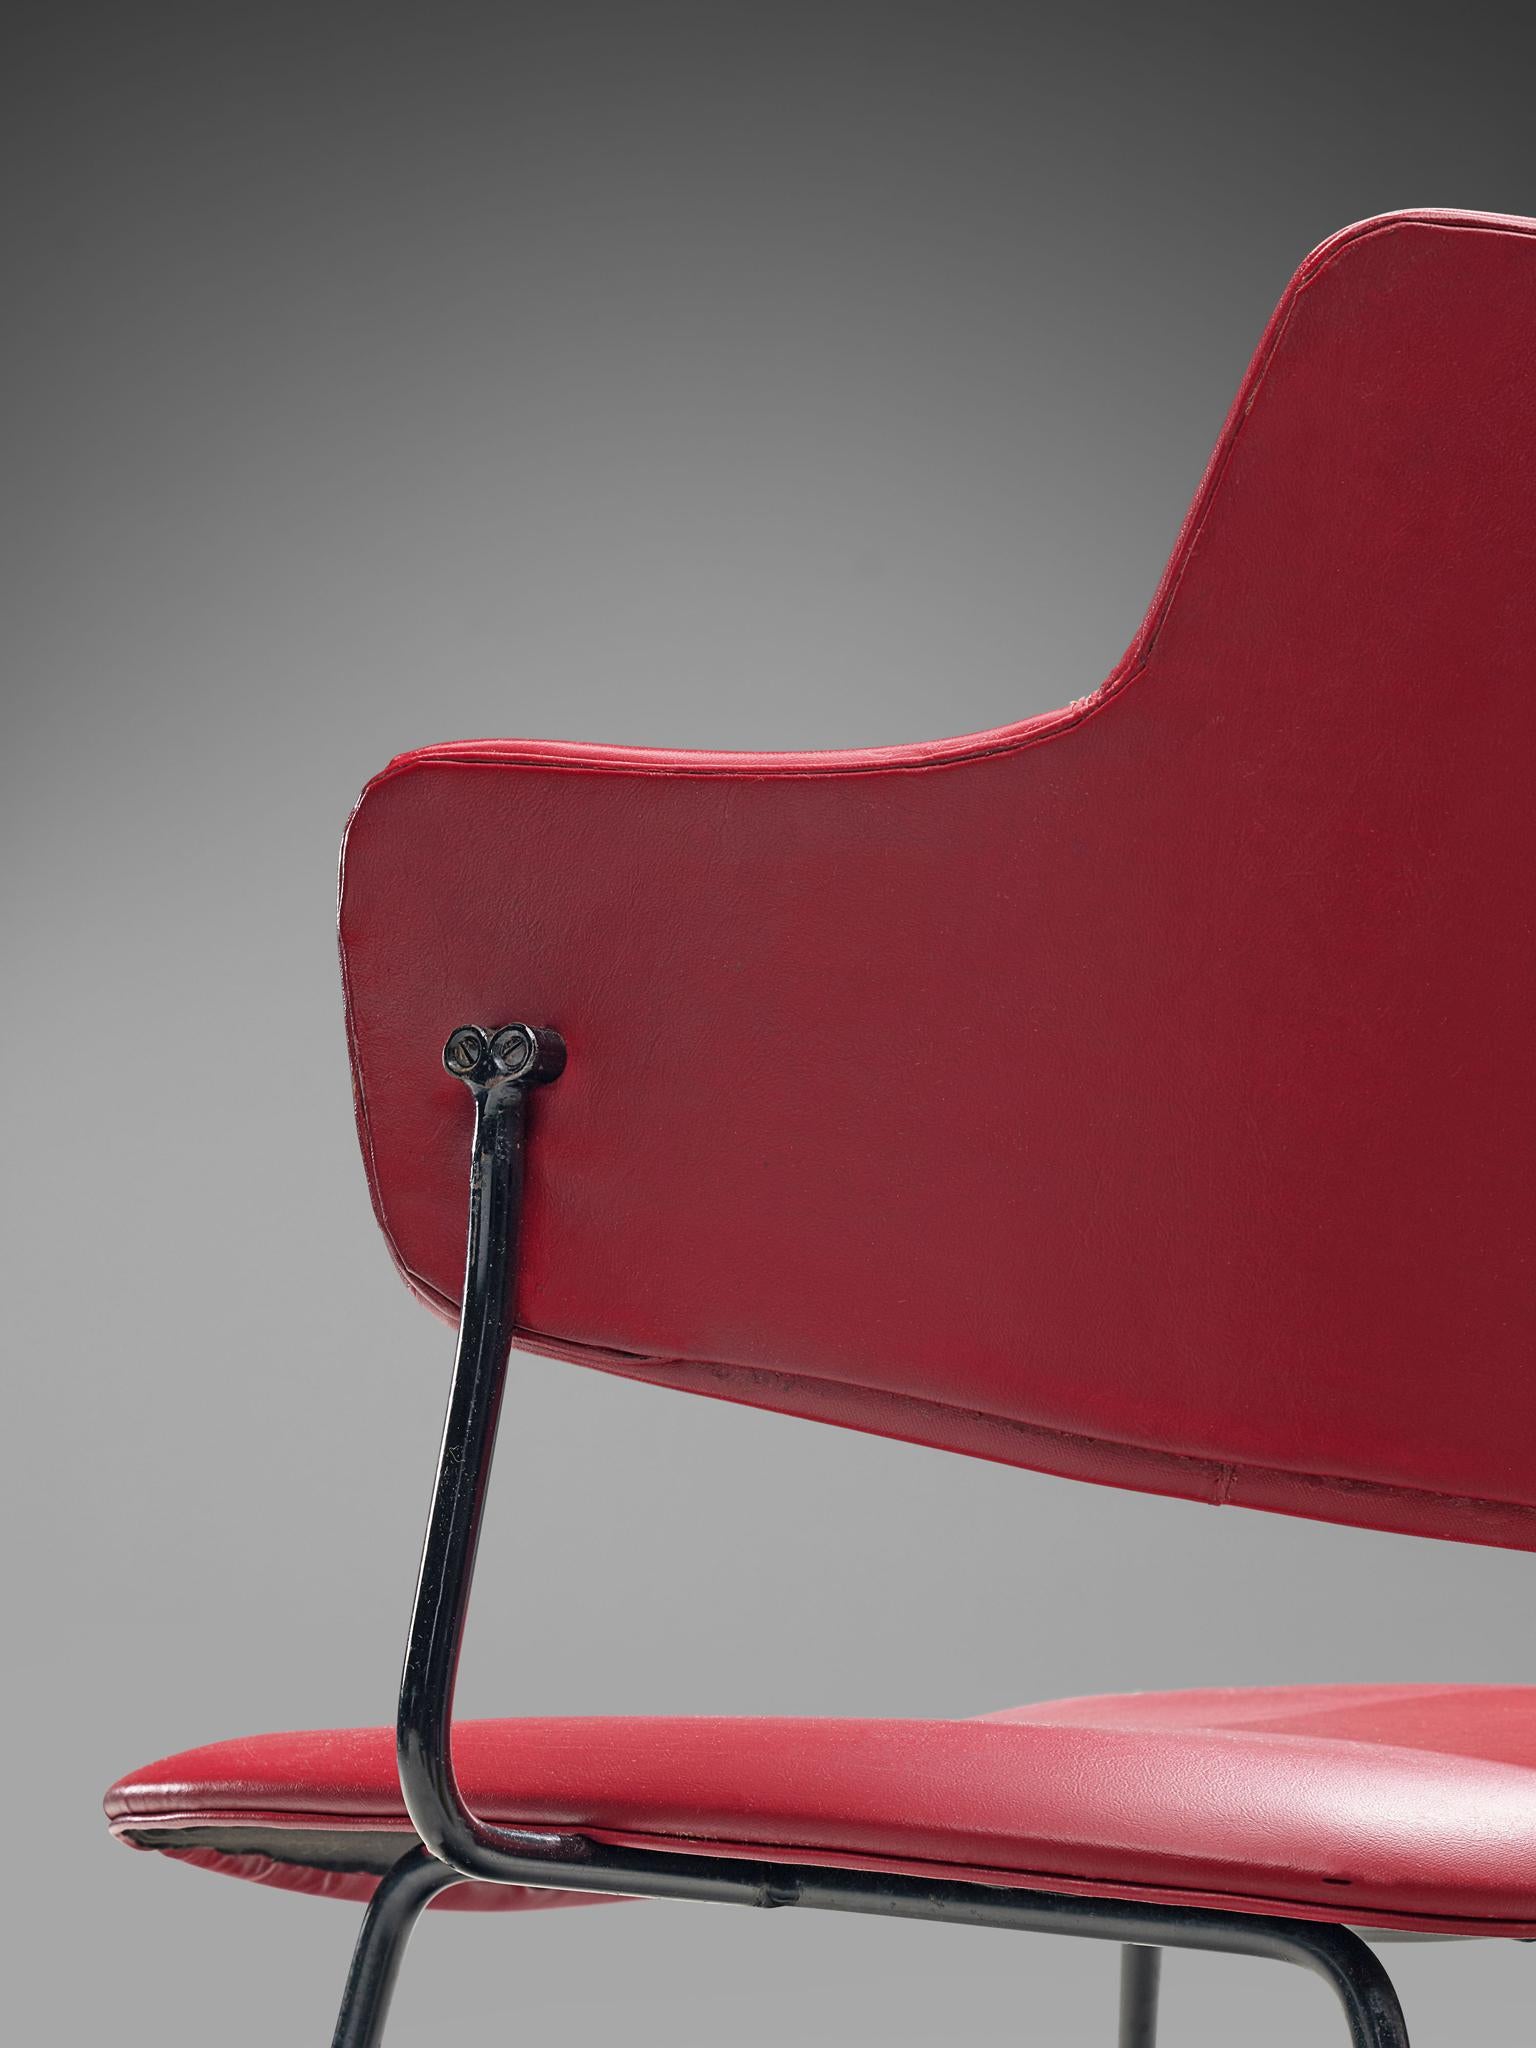 Mid-20th Century Wim Rietveld & W.H. Gispen '205' Chair in Red for Kembo